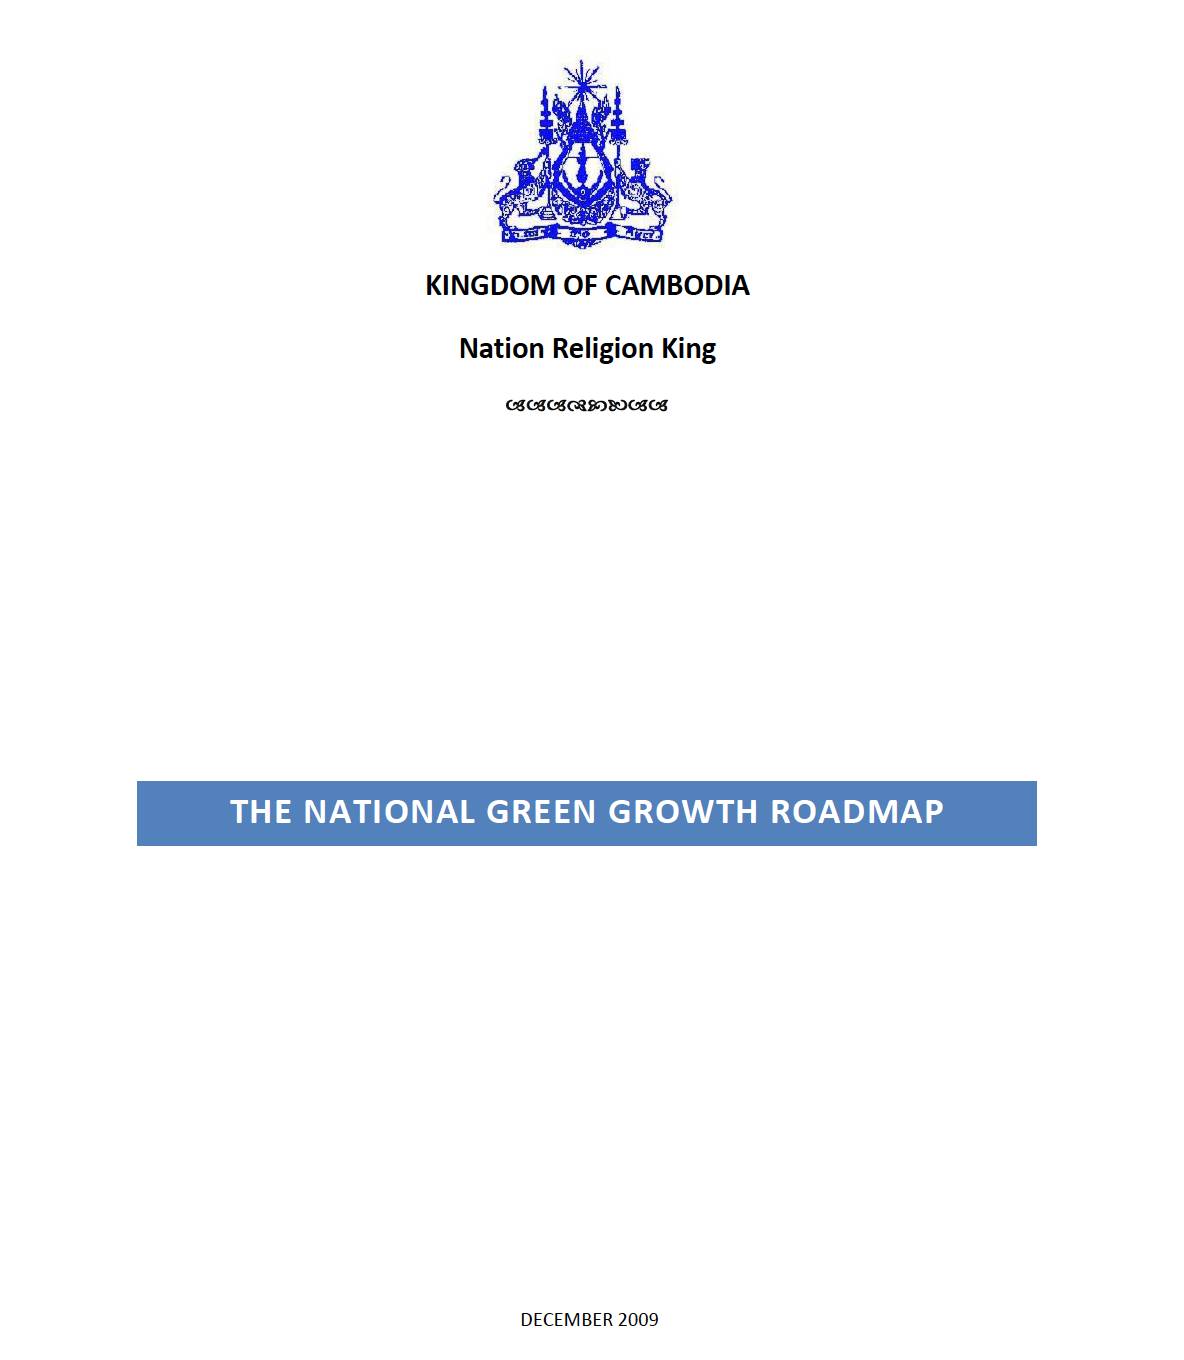 Cambodia: The National Green Growth Roadmap